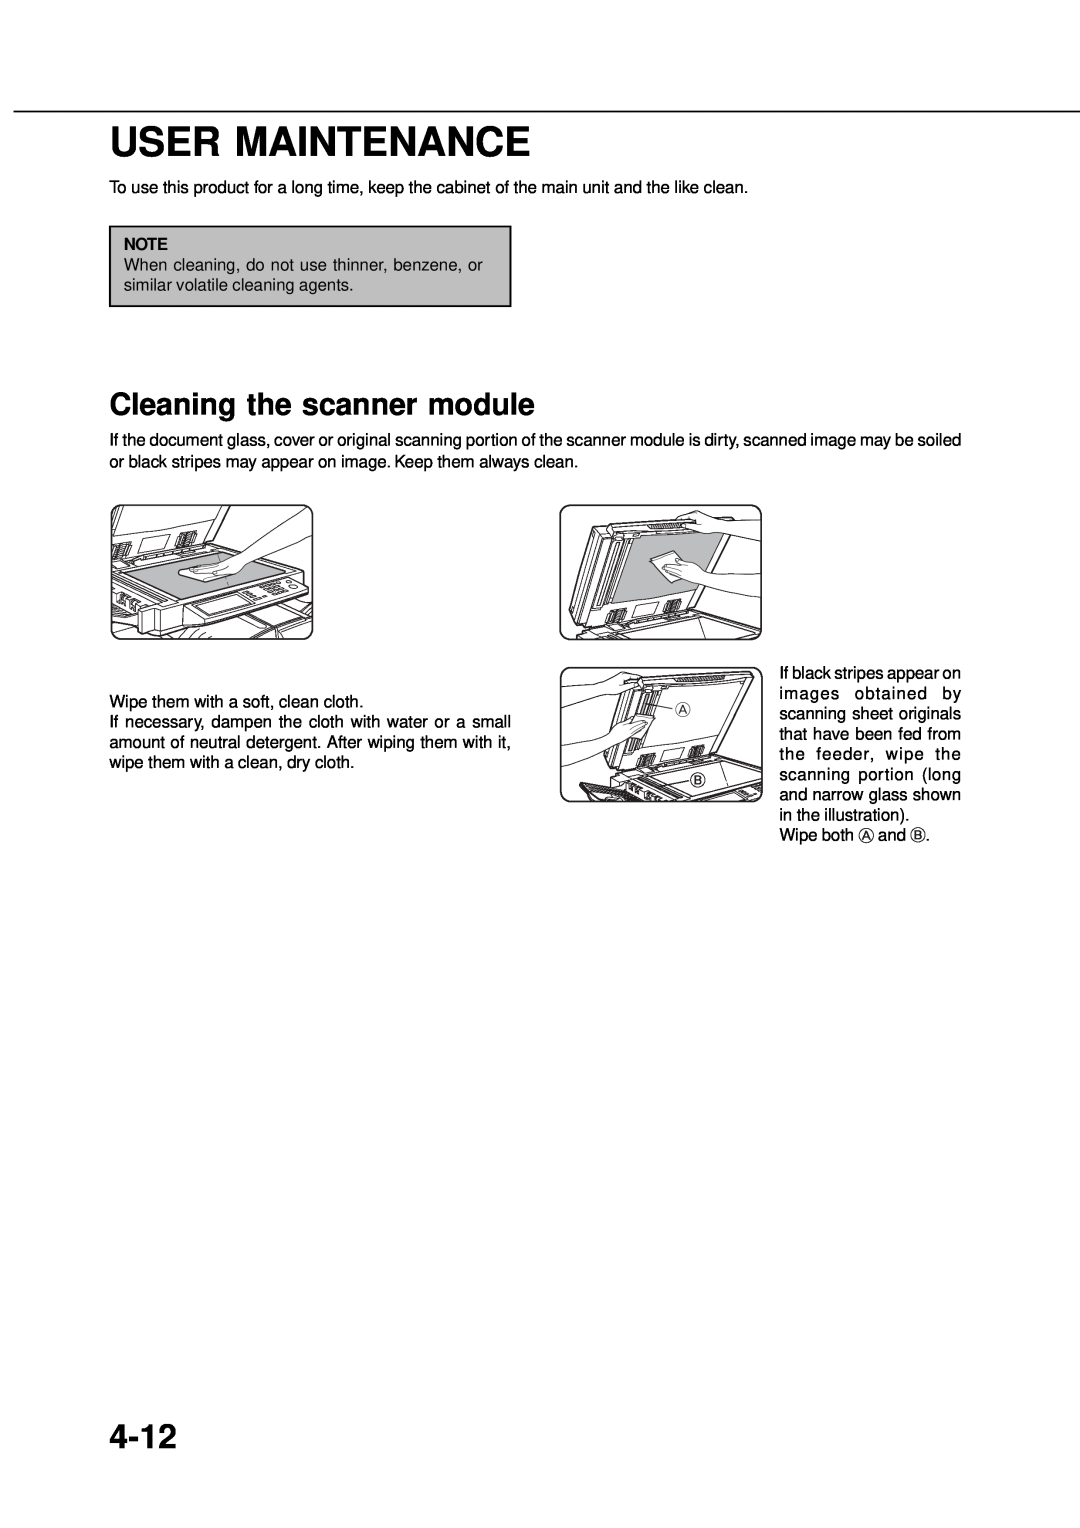 Sharp AR_M280, AR-350 operation manual User Maintenance, 4-12, Cleaning the scanner module 